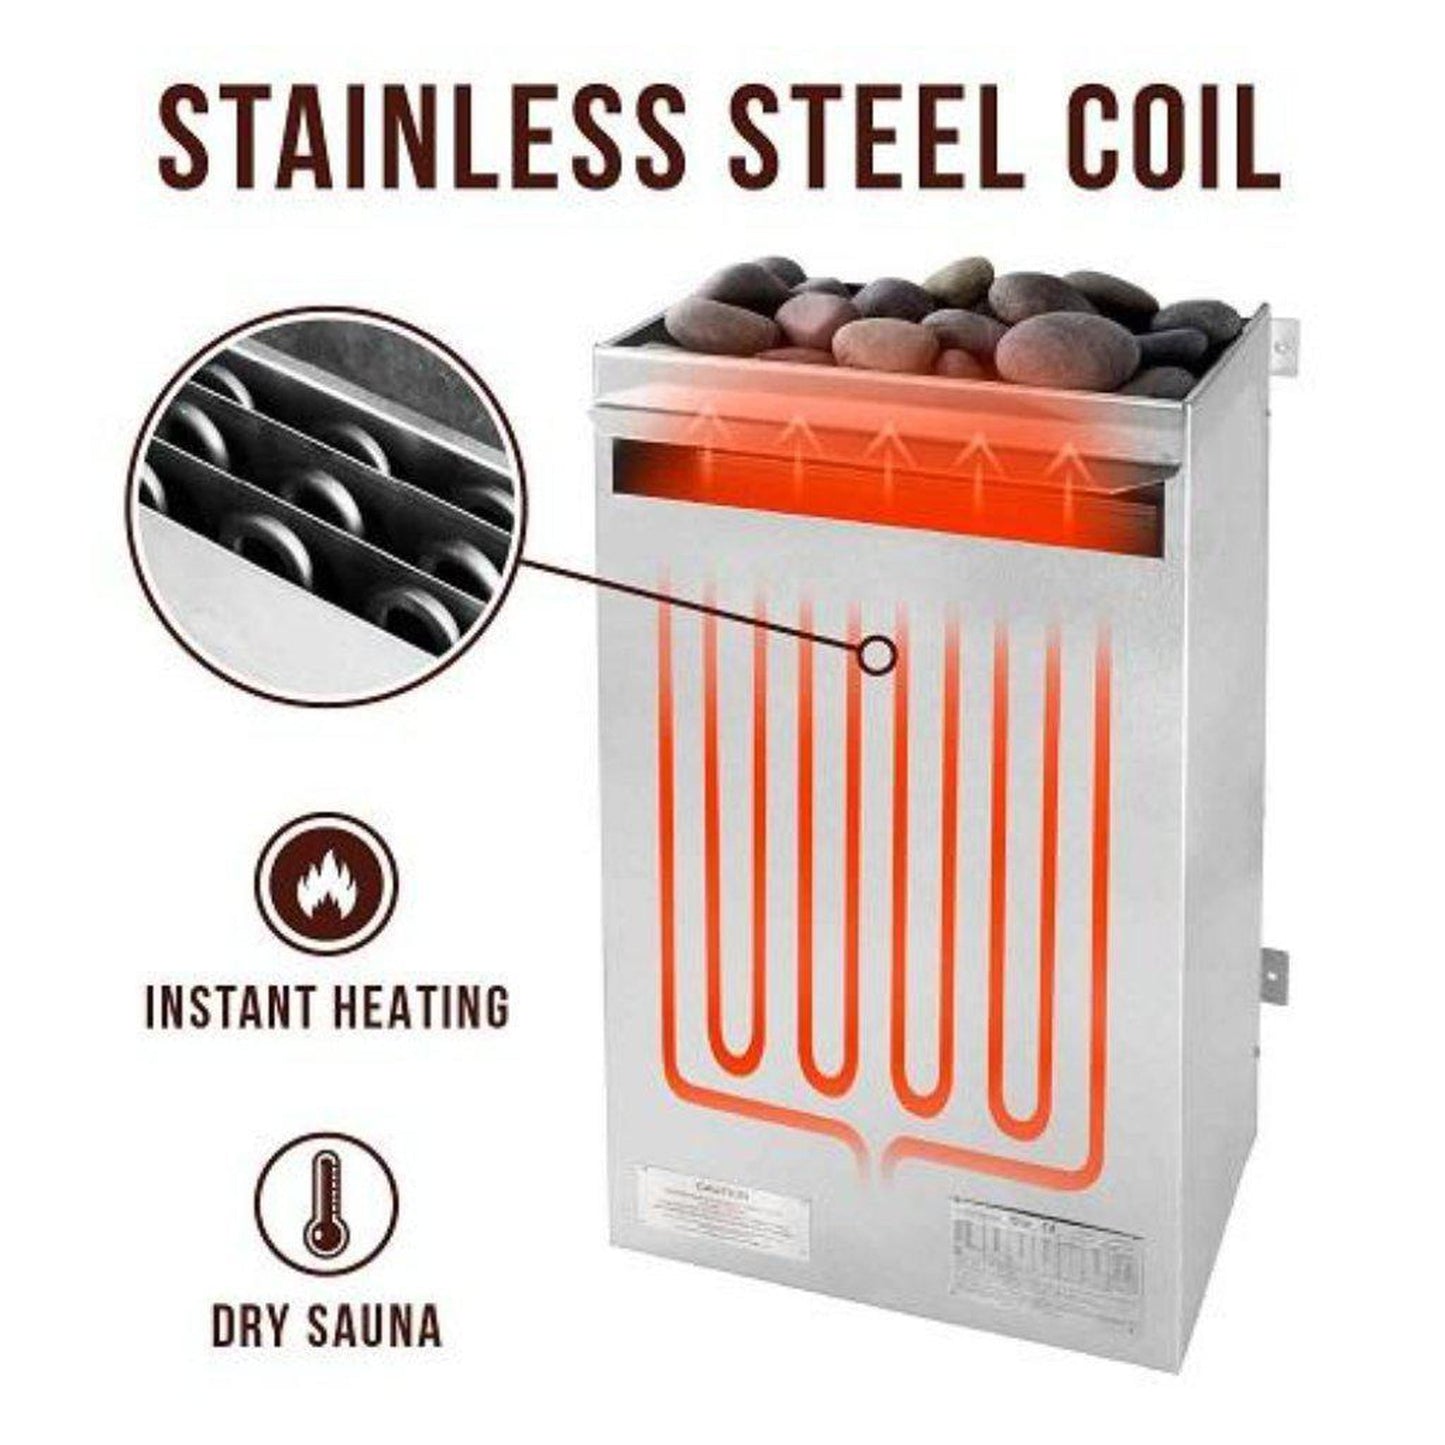 Scandia Manufacturing Electric Ultra 16" x 14" x 29" Wall Mounted Stainless Steel 6.0 kW 208V Medium Sauna Heater with Built-in Thermostat